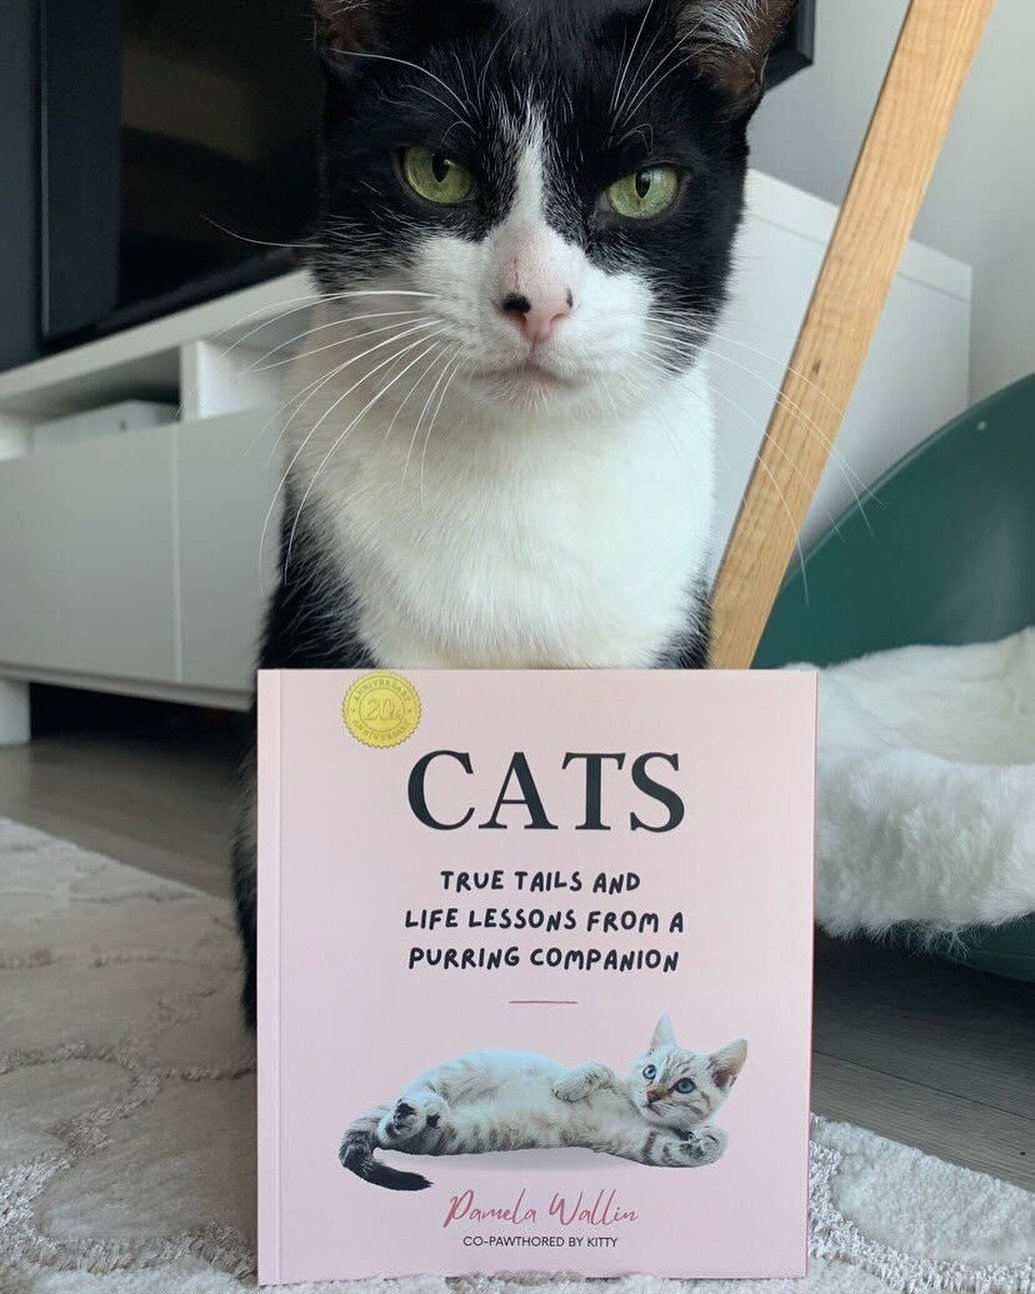 A round of a-paws for Pamela Wallin&rsquo;s &ldquo;Cats!&rdquo; 
Owners and pets alike can&rsquo;t get enough of this adorable book, filled with anecdotes and observations about our furry and feisty friends. Just ask&nbsp;@thepurrpawsbros&nbsp;😻 
Ha